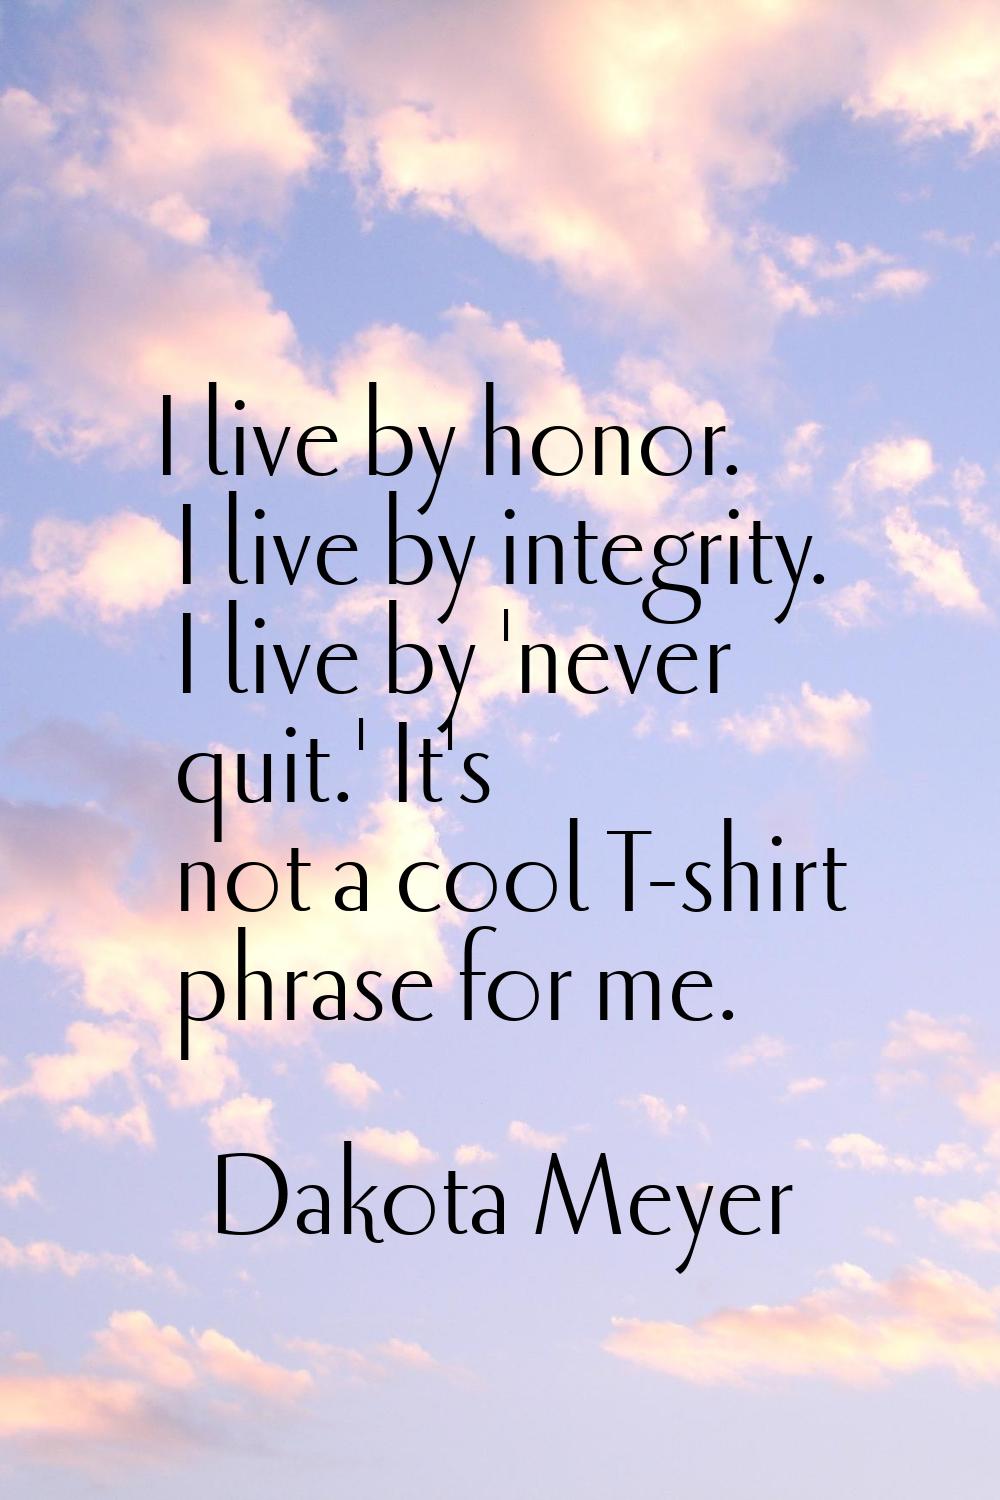 I live by honor. I live by integrity. I live by 'never quit.' It's not a cool T-shirt phrase for me